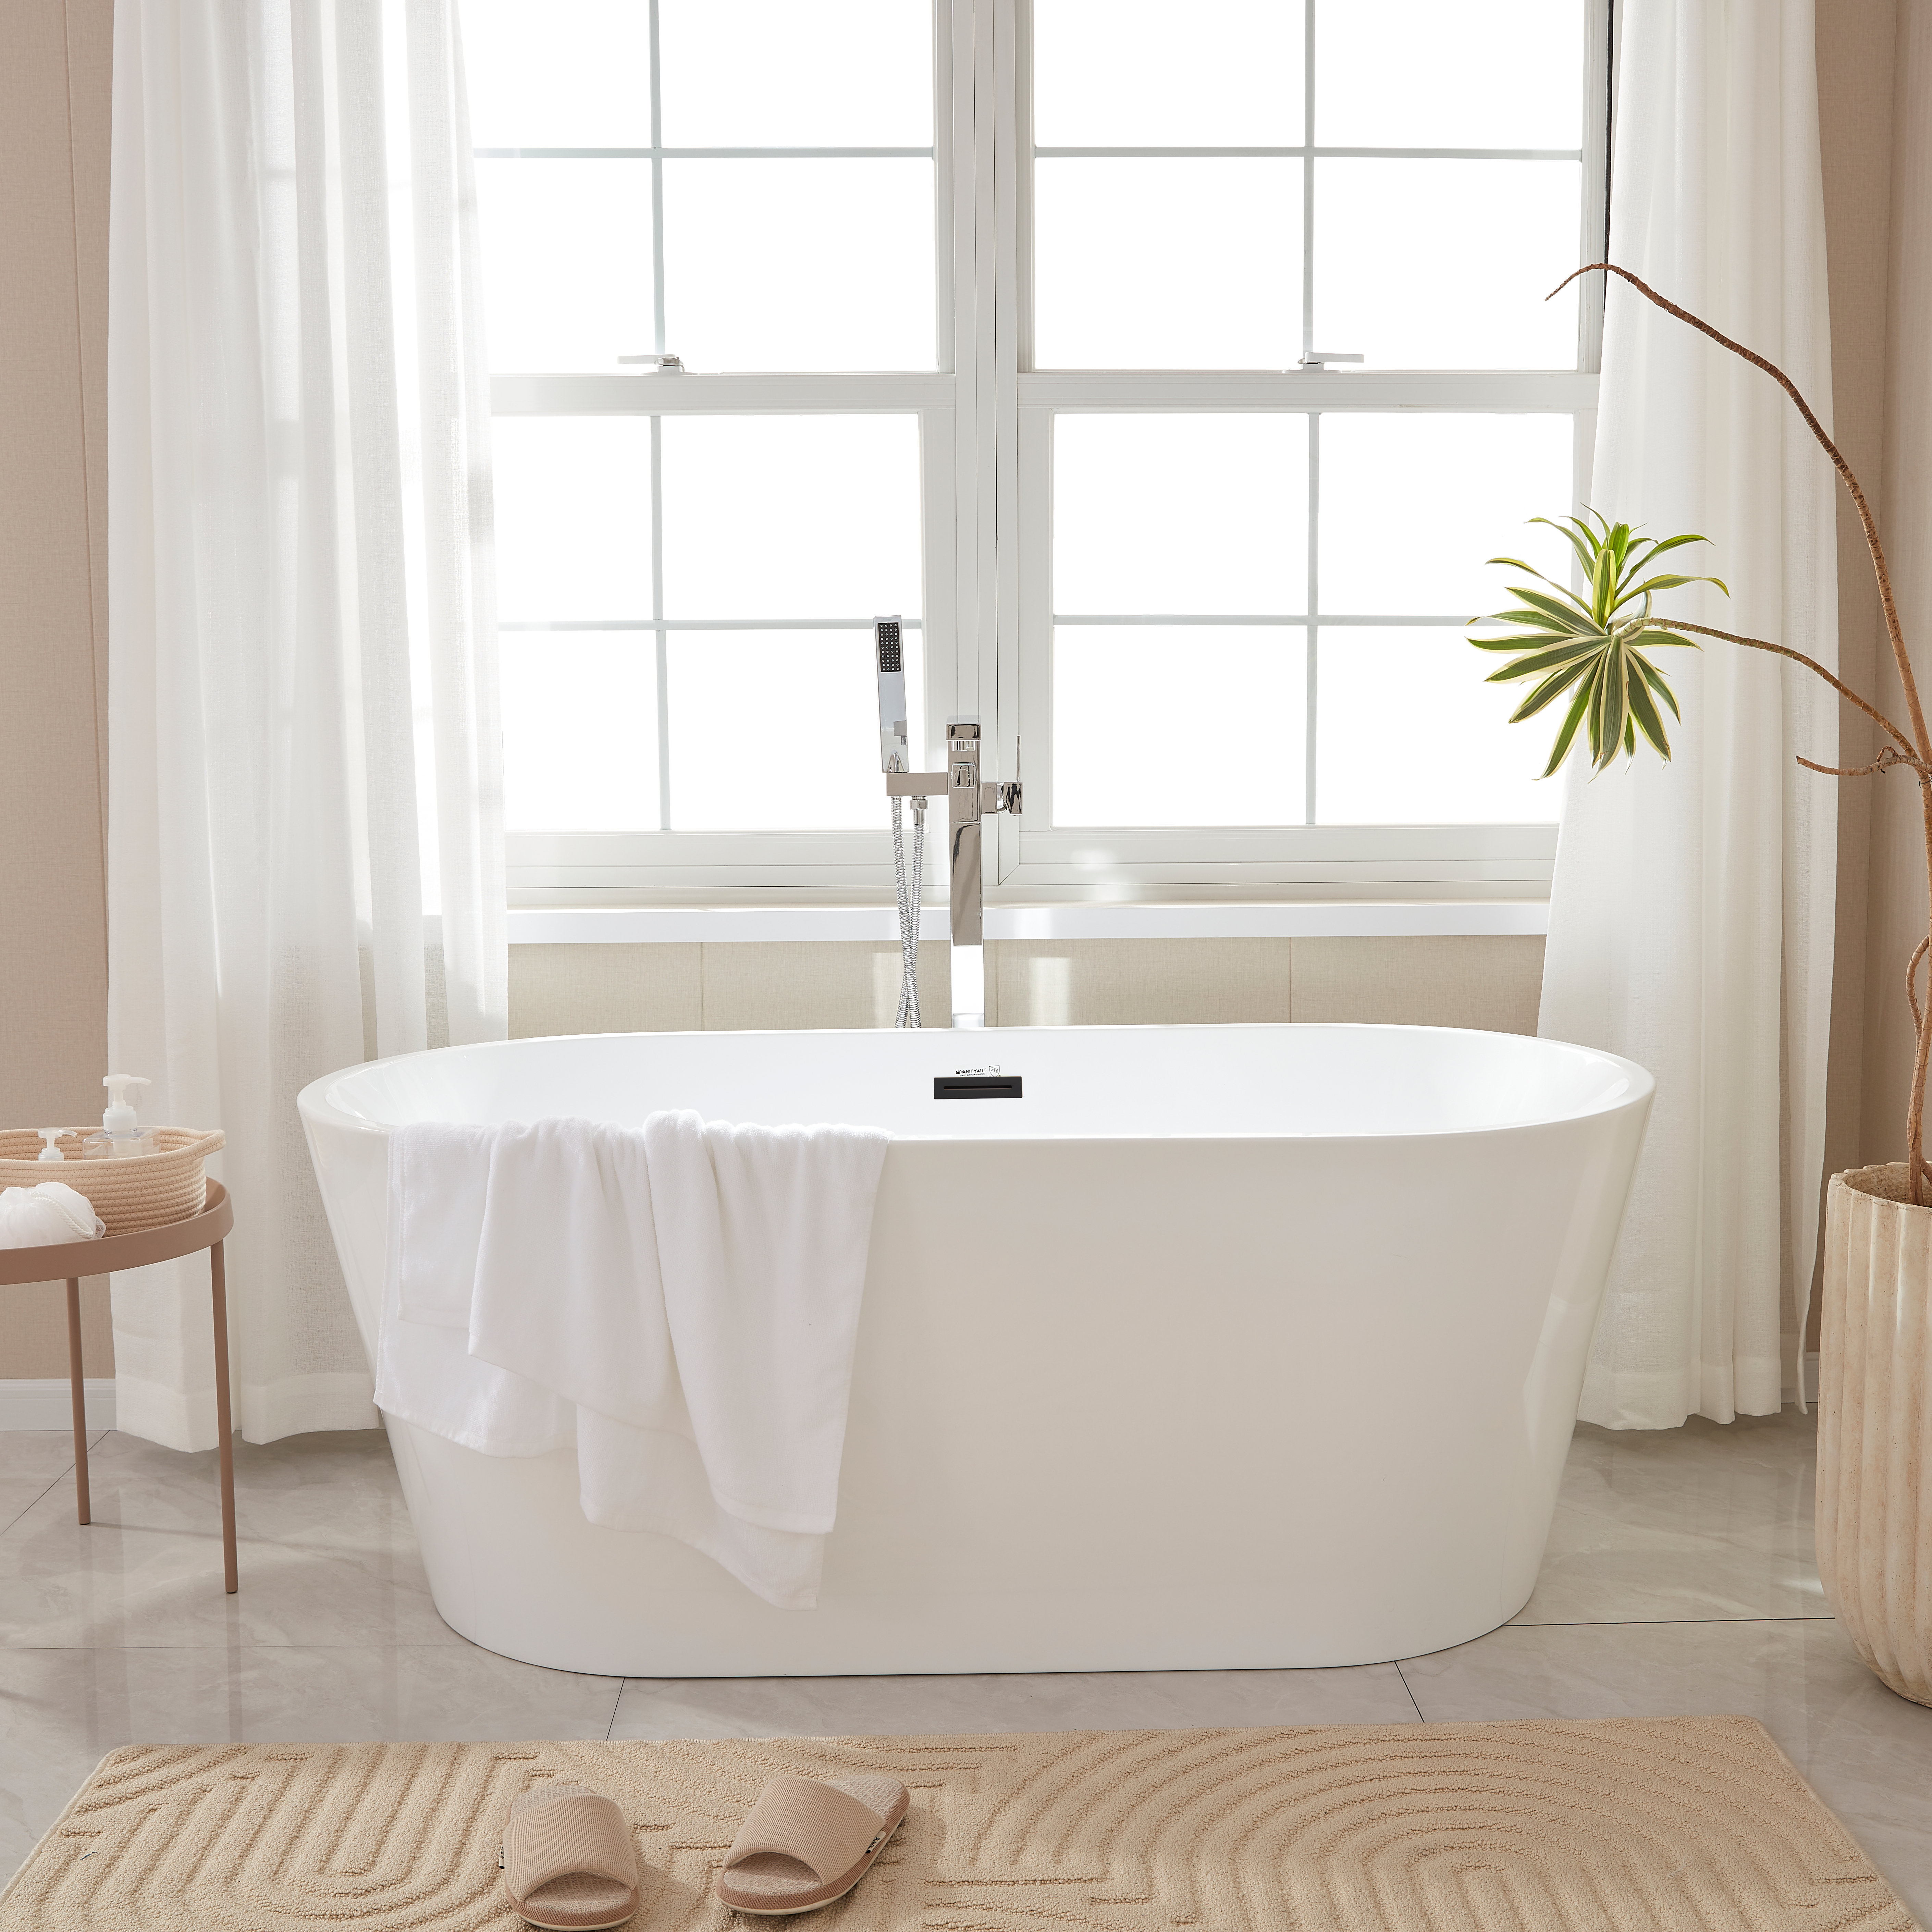 Bathtub And Shower Mats Clear - Room Essentials™